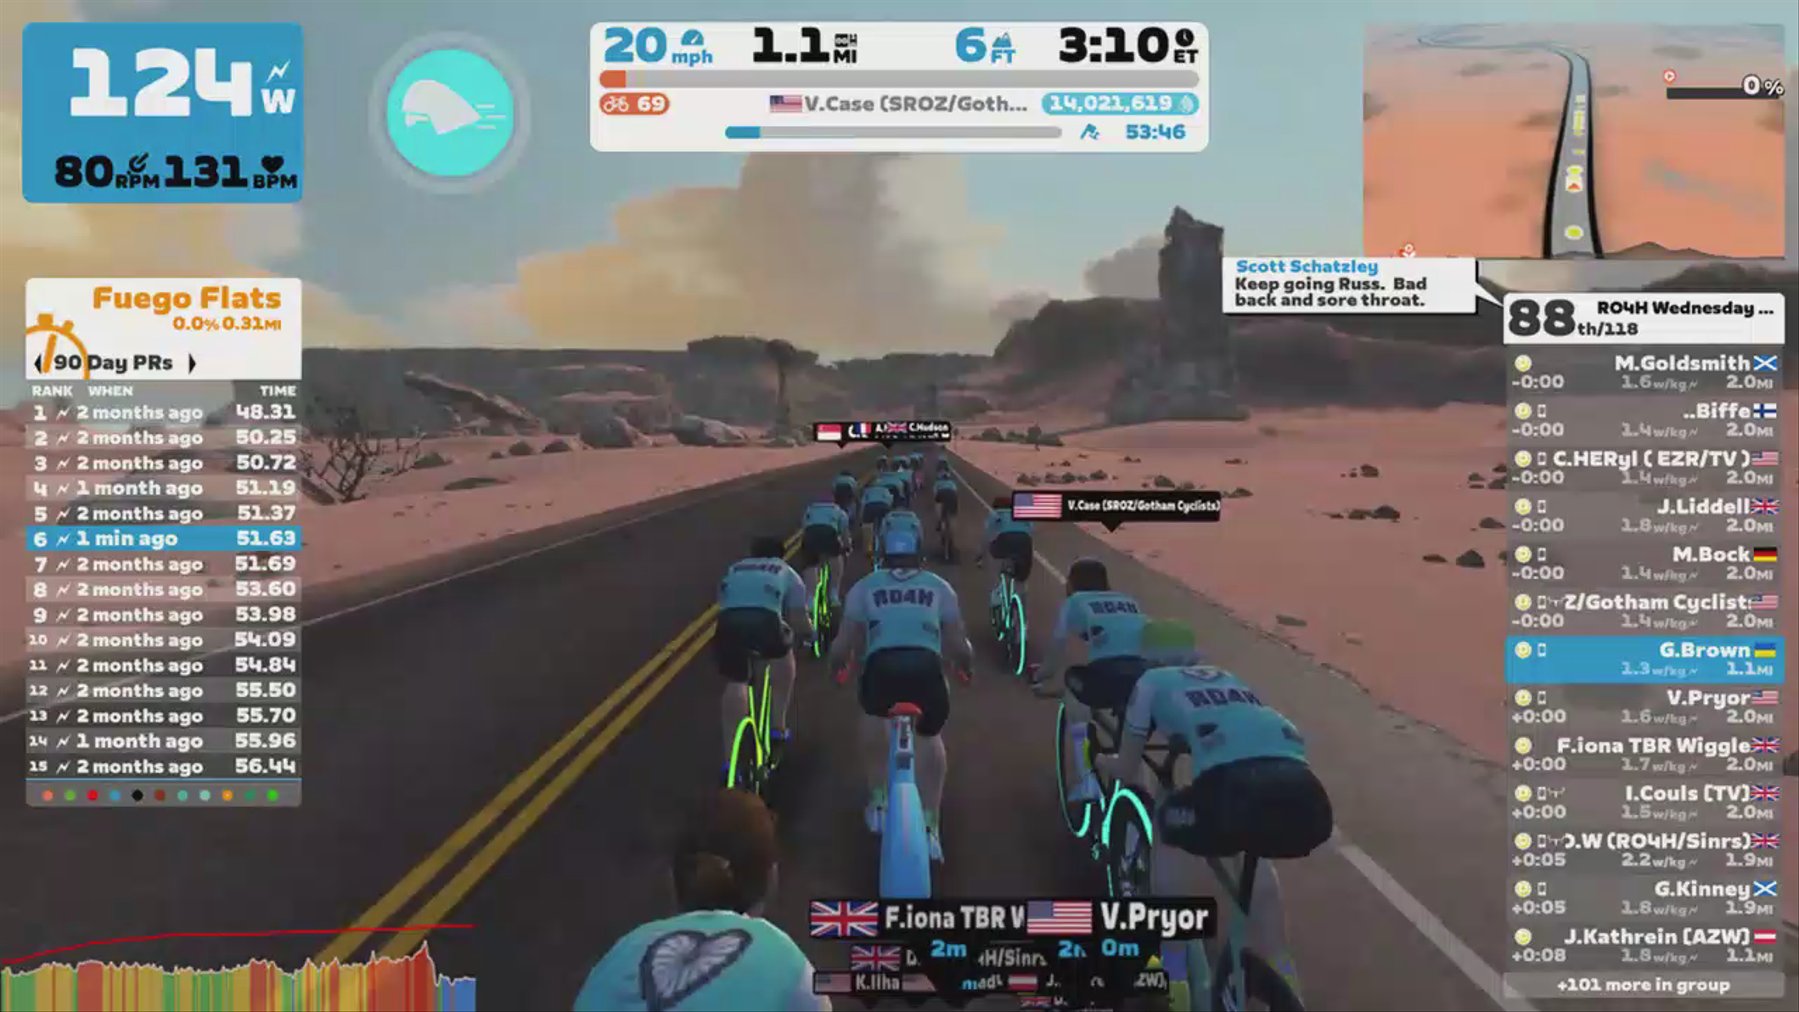 Zwift - Group Ride: RO4H Wednesday Spin (D) on Big Flat 8 in Watopia